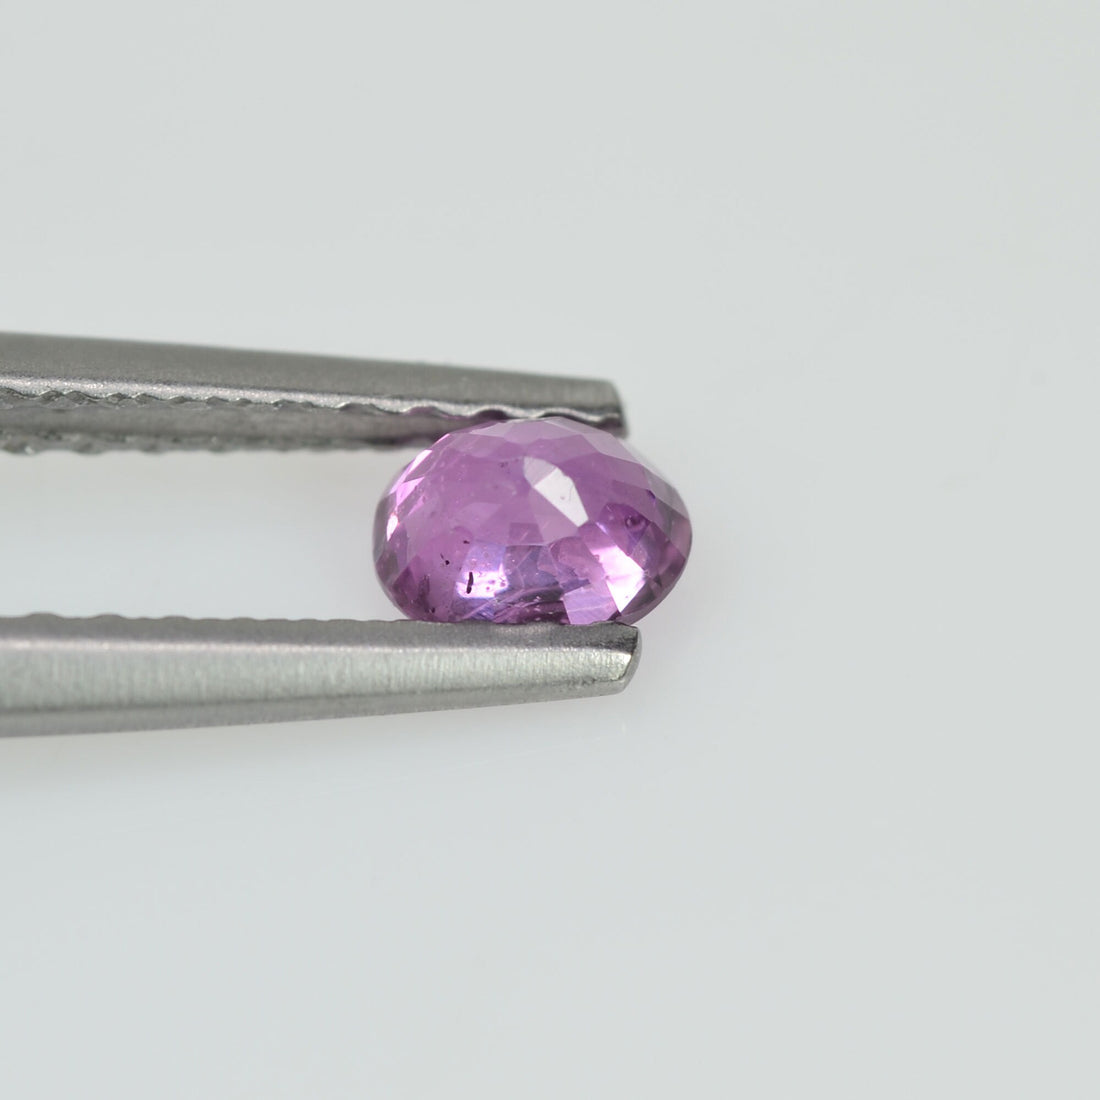 0.31 cts Natural Pink Sapphire Loose Gemstone oval Cut